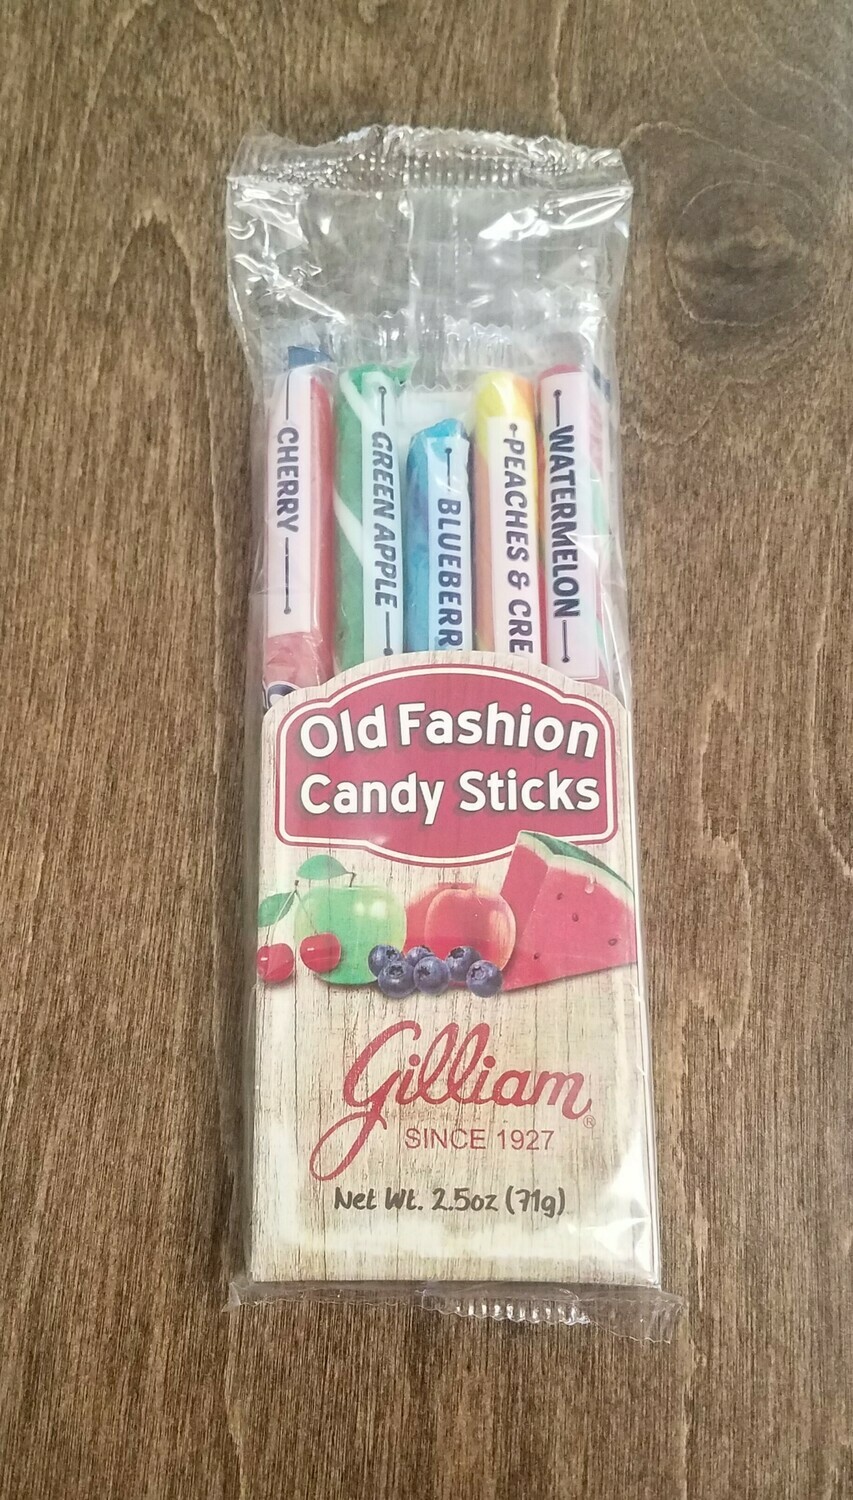 Old Fashioned Candy Sticks - Peaches and Cream, Green Apple, Watermelon, Blueberry, and Cherry